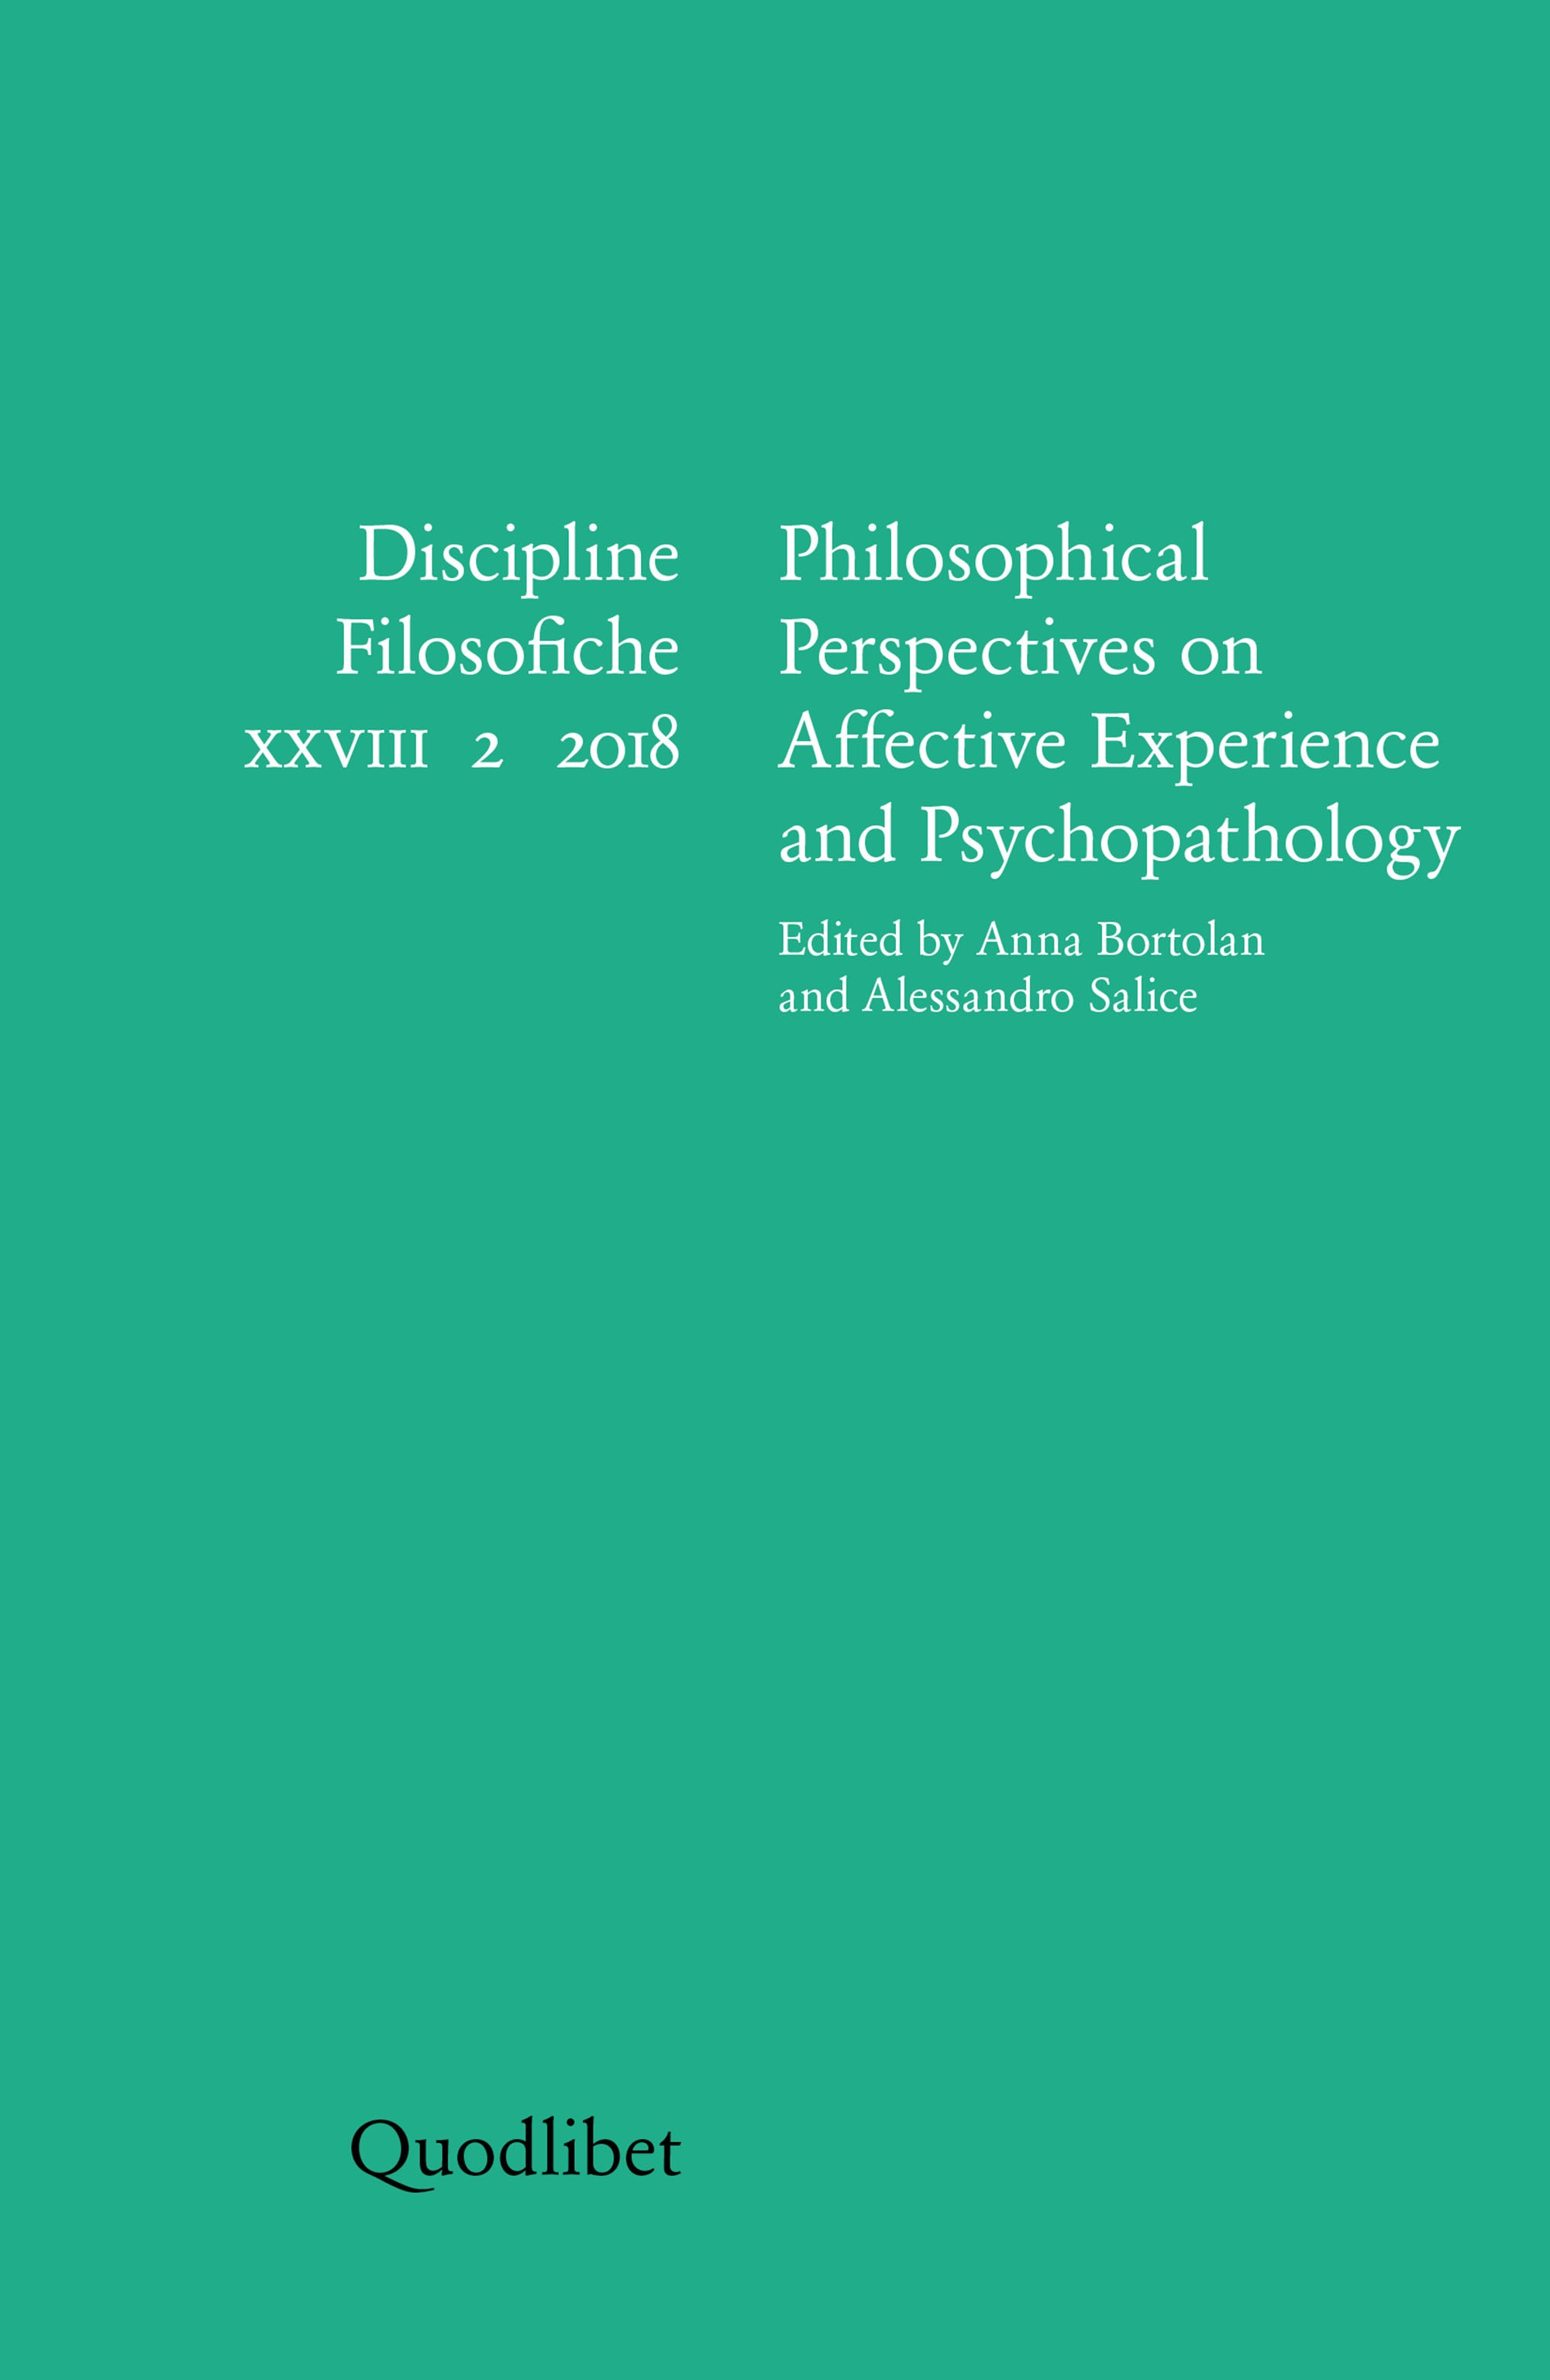 Philosophical Perspectives on Affective Experience and Psychopathology - Librerie.coop